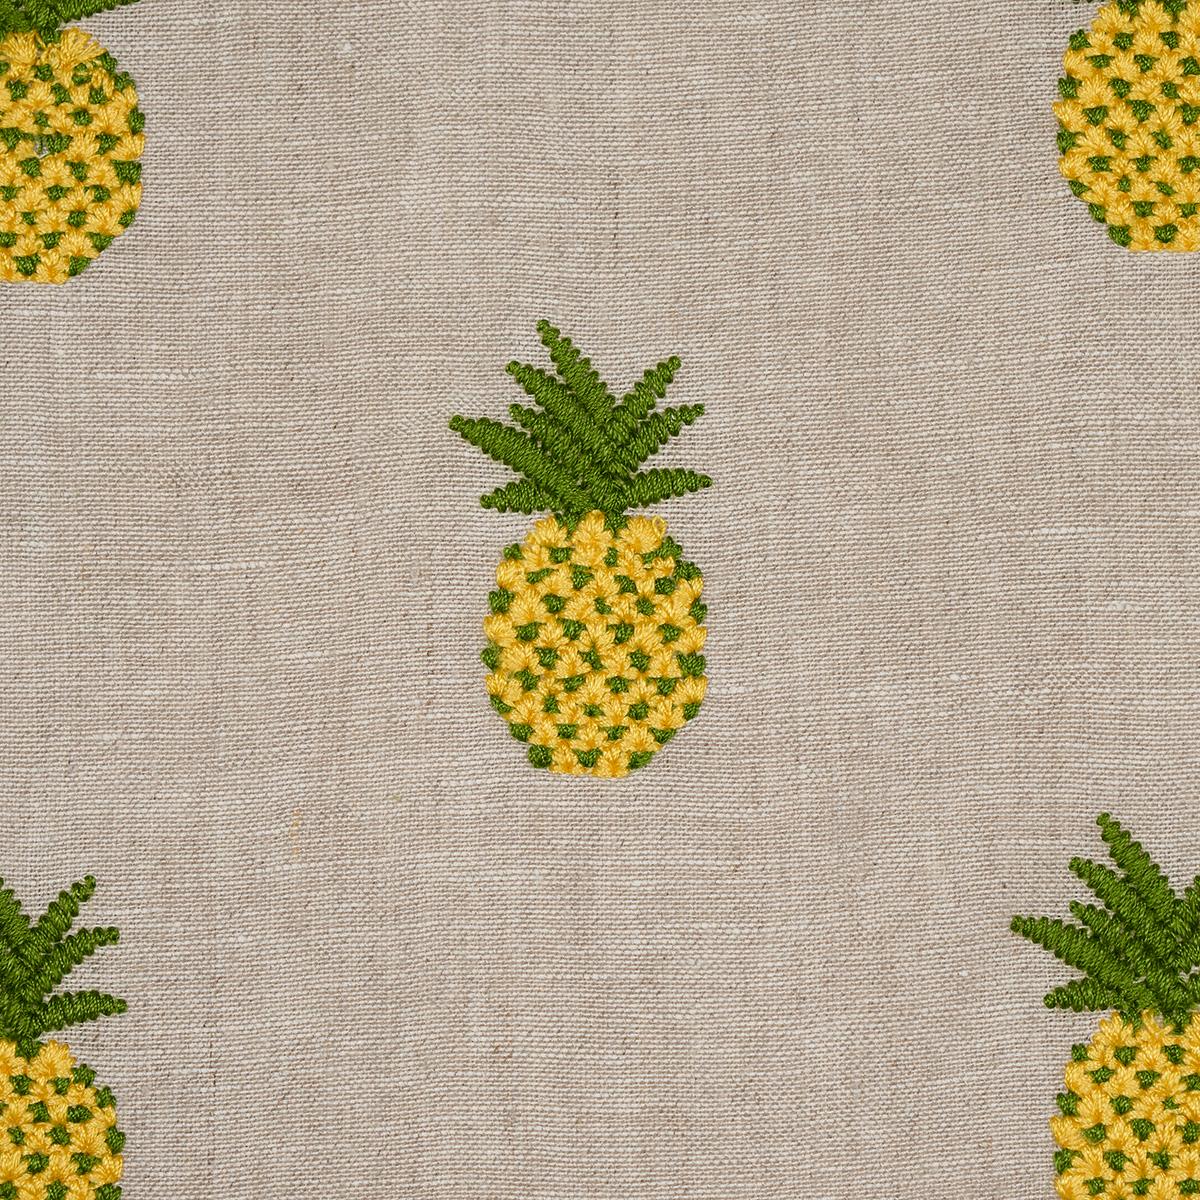 PINEAPPLE EMBROIDERY_GREEN ON NATURAL